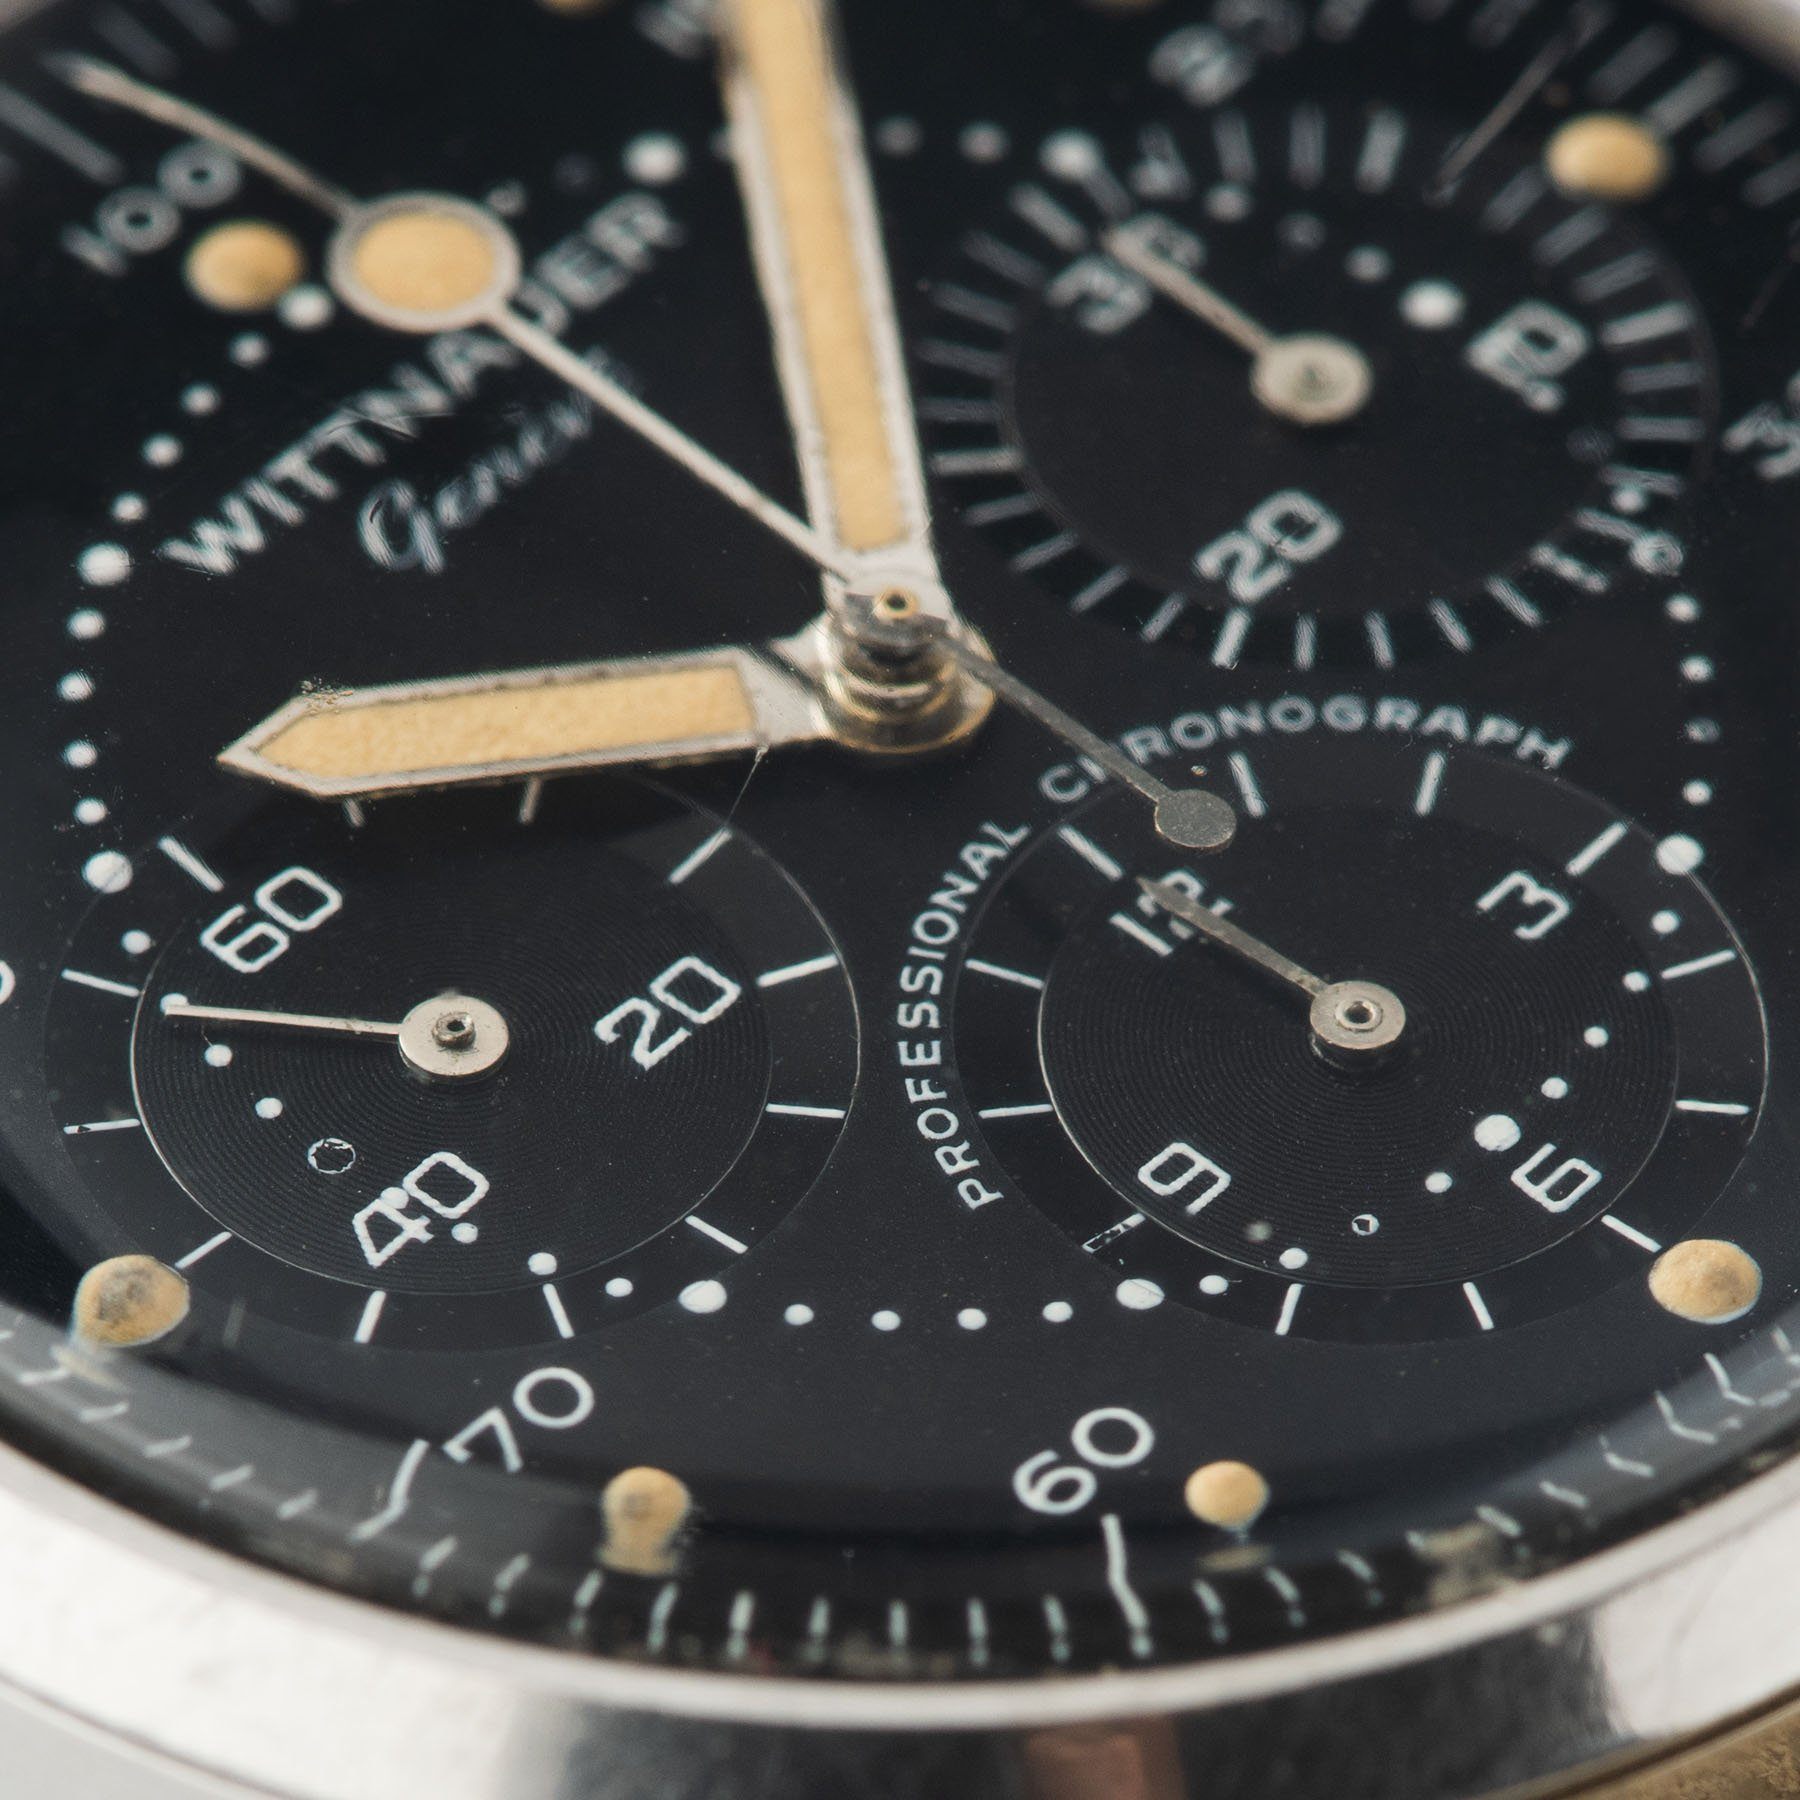 Wittnauer 242T Matte black Dial Steel Chronograph